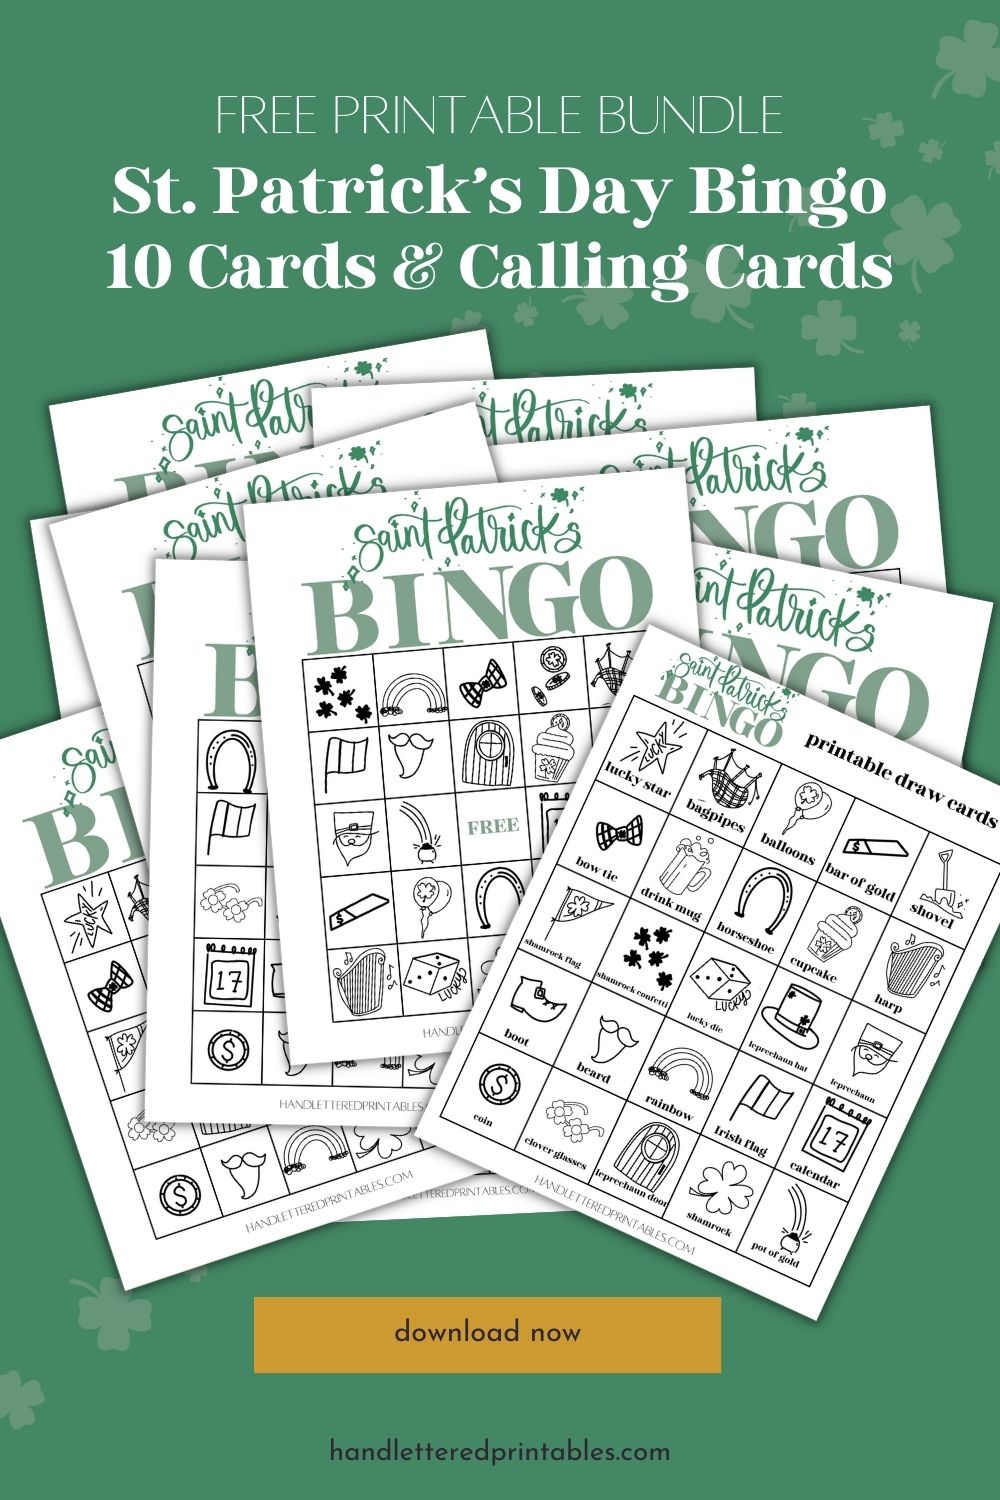 image of 10 printed saint patricks day bingo cards on green background plus printed calling cards page ready to be cut to size. text over reads free printable bundle: st. patrick's day bingo 10 cards and calling cards button says 'download now' with handletteredprintables.com watermark